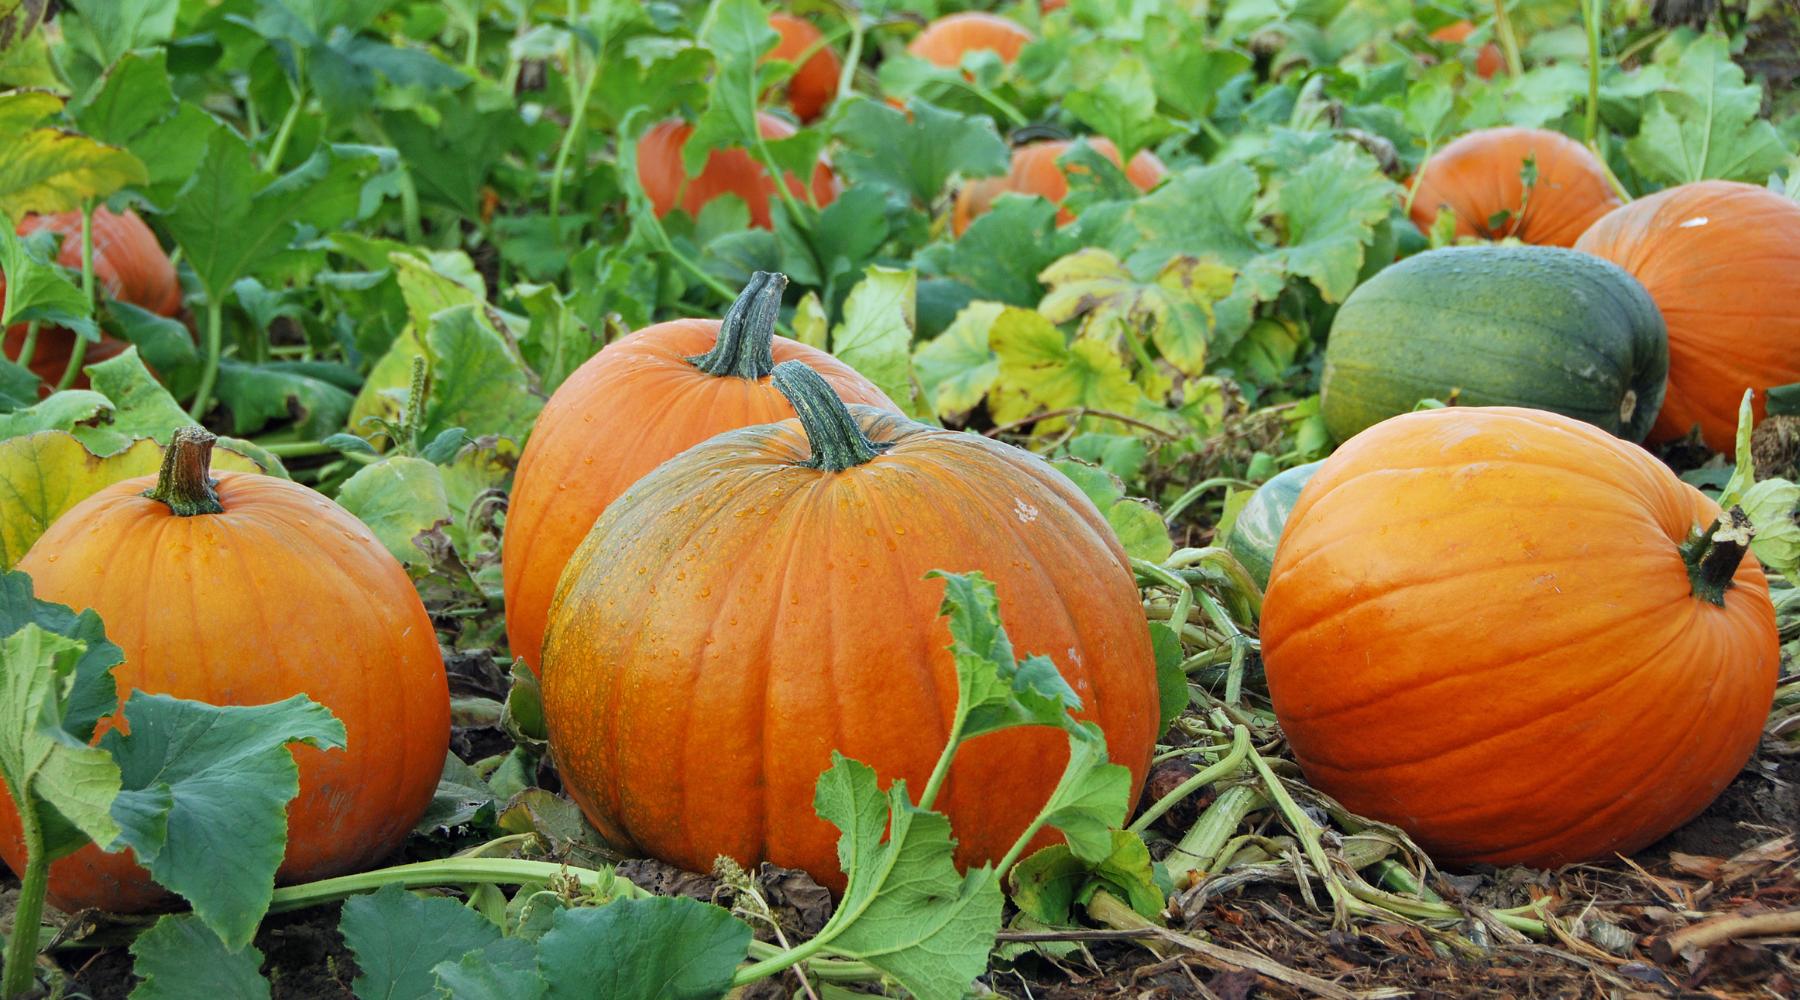 Rogue valley U-pick farms, agriculture in the rogue valley, things to do in Medford, fall fun, support local farmers, support local buisinesses, u pick, farming, pumpkins